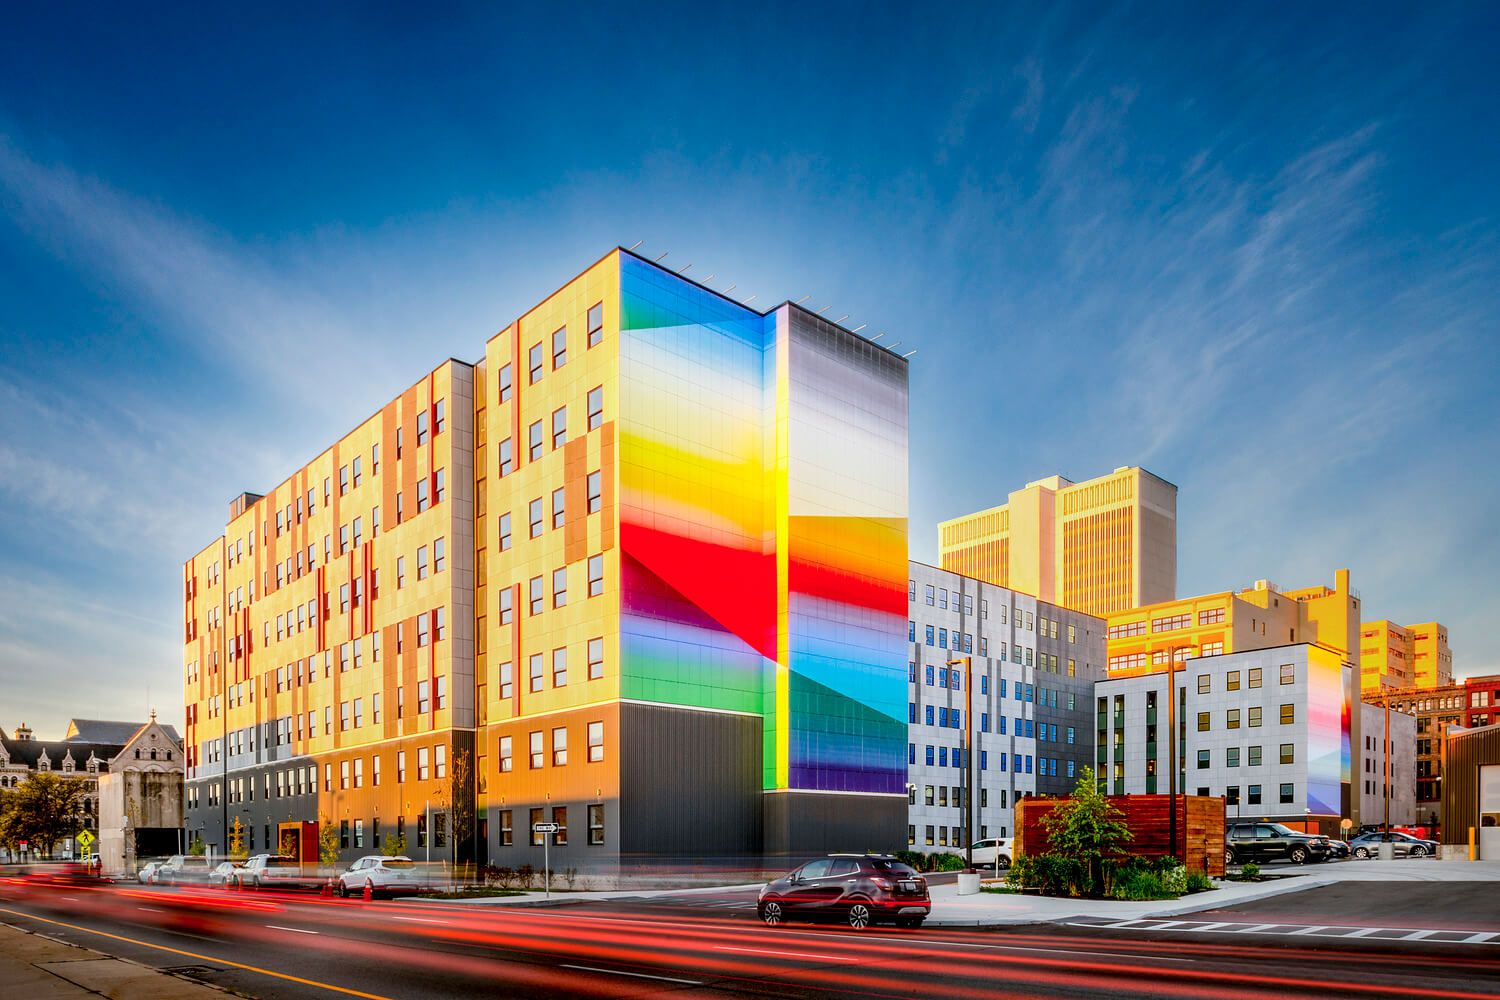 the side of a residential building with a large colorful mural